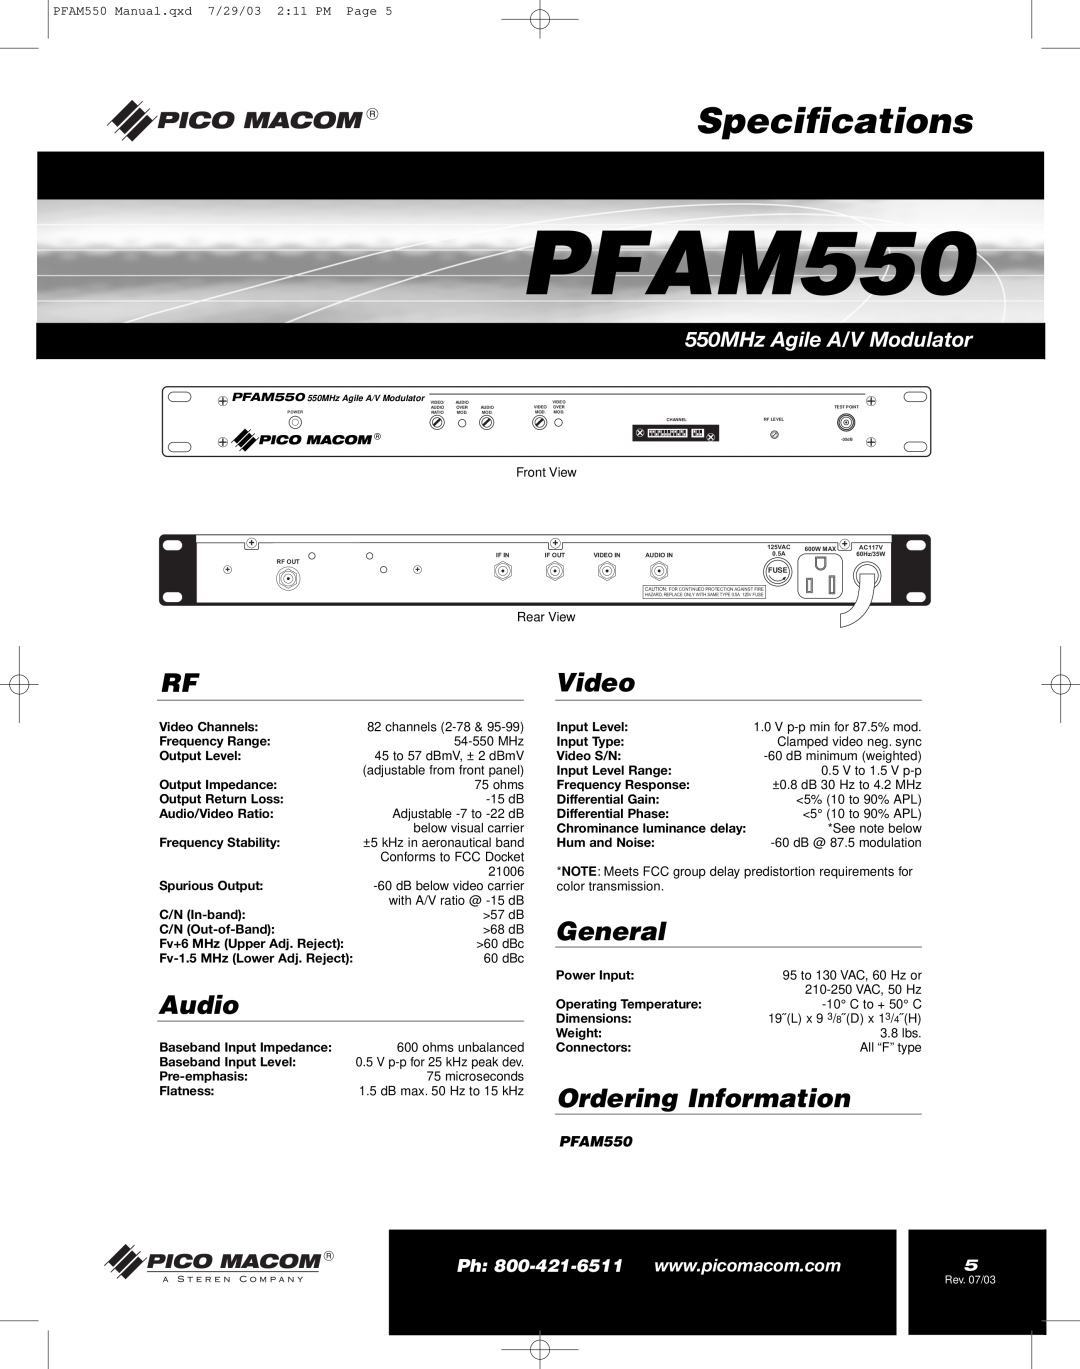 Pico Macom PFAM550 Specifications, RFVideo, Audio, General, Ordering Information, 550MHz Agile A/V Modulator 